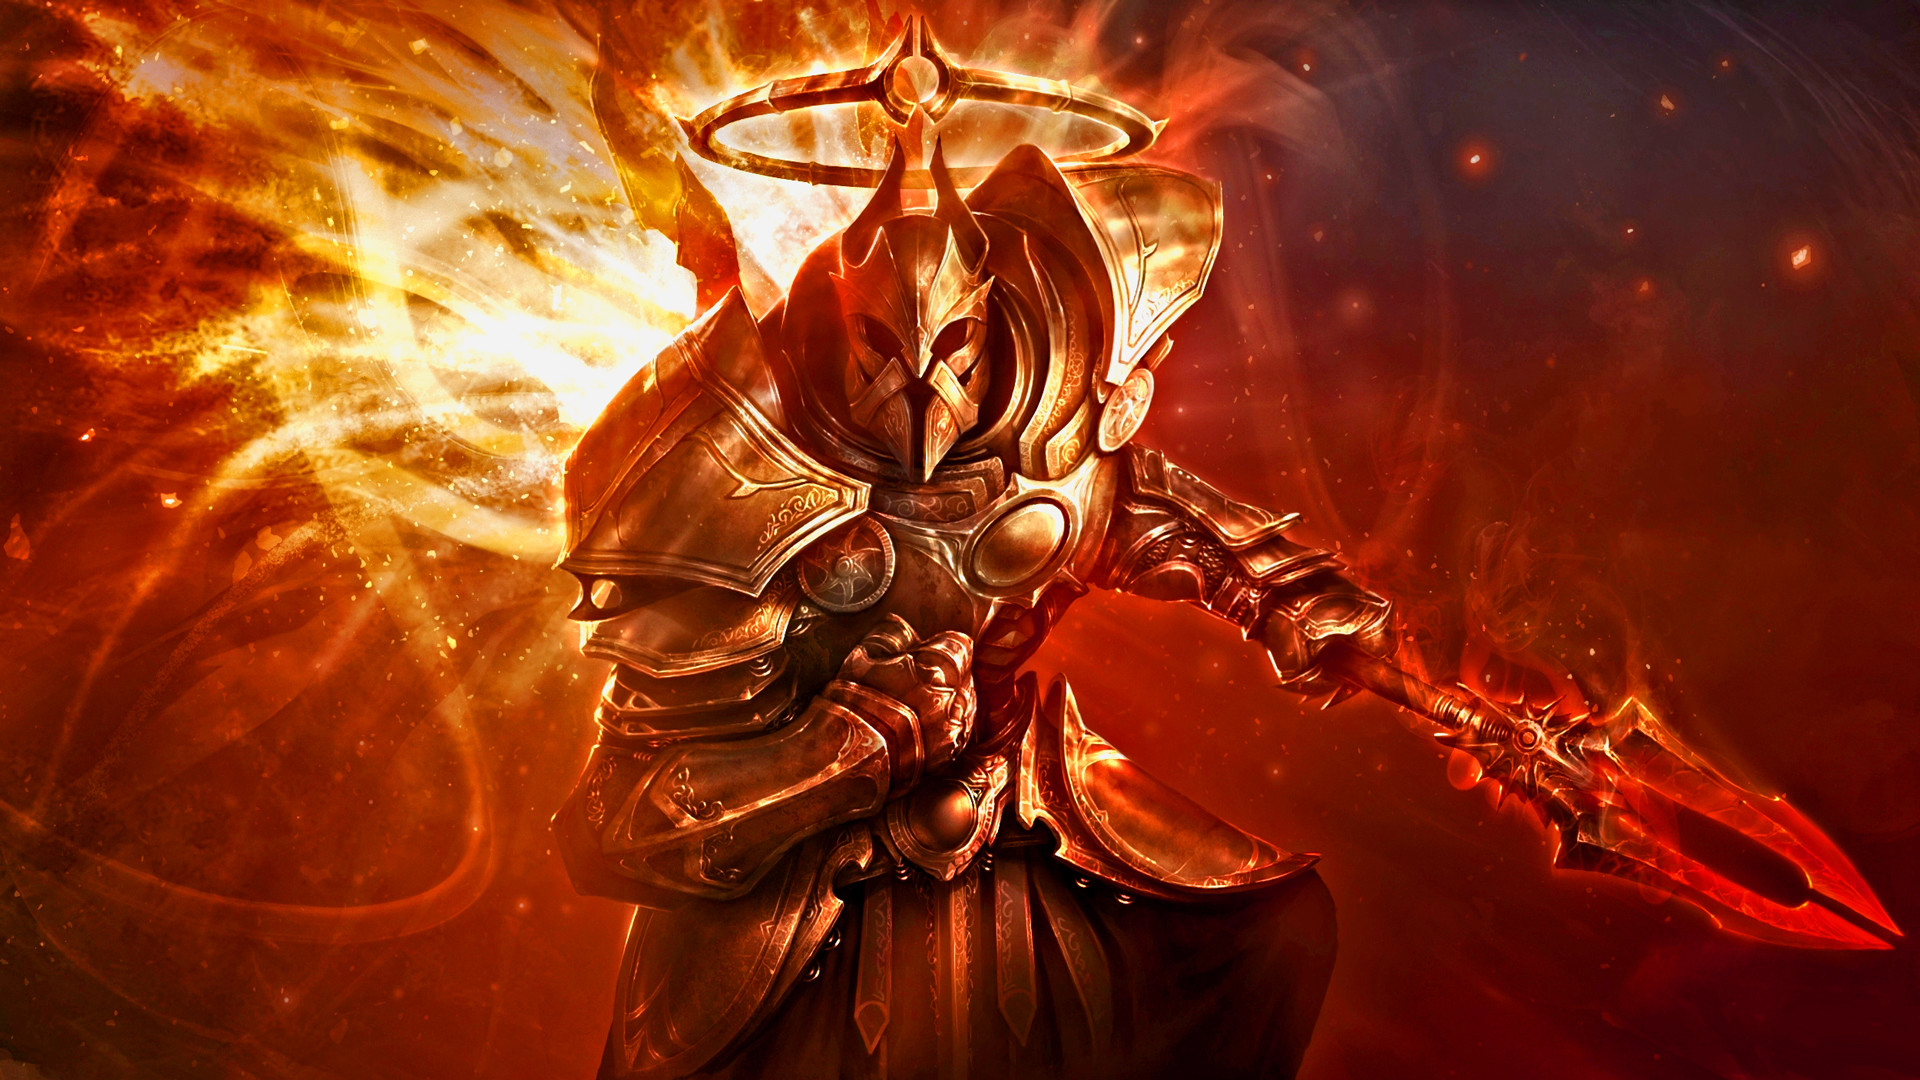 1920x1080 Fantasy images Warrior HD wallpaper and background photos